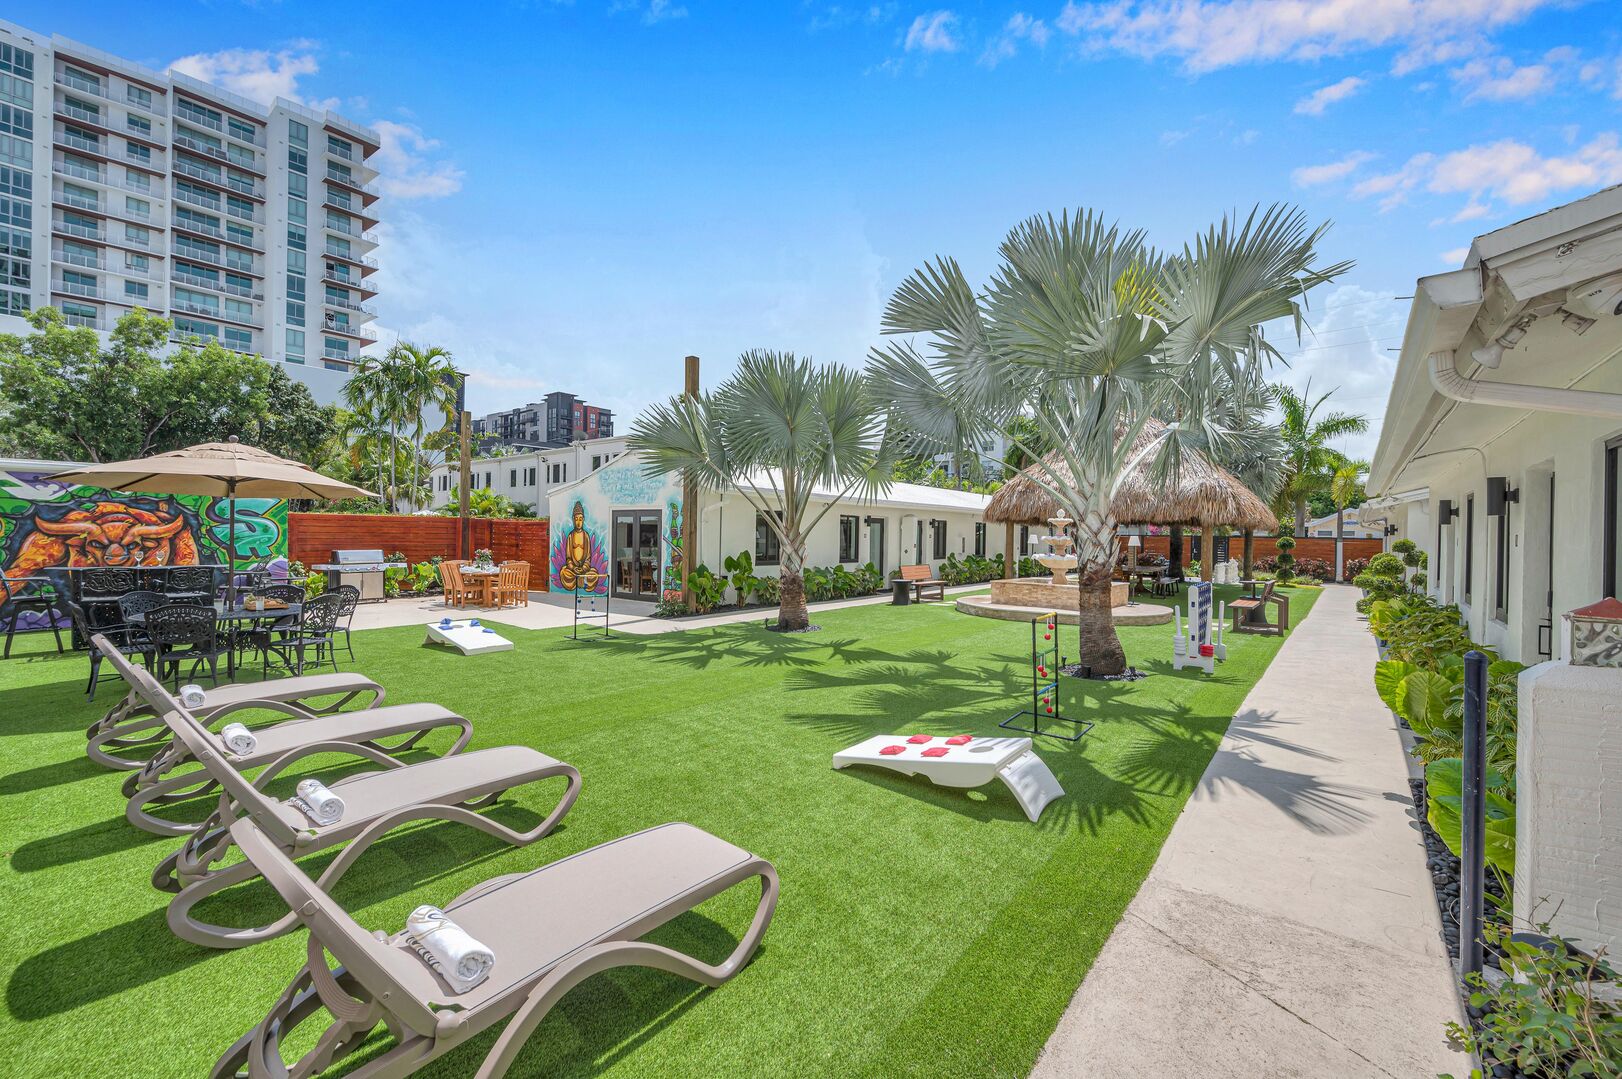 Suite Two is one of seven suites surrounding a garden that features wall murals, a tiki gazebo, a giant chess board, mini golf, a hot tub, a grill, as well as many lounging and dining areas.